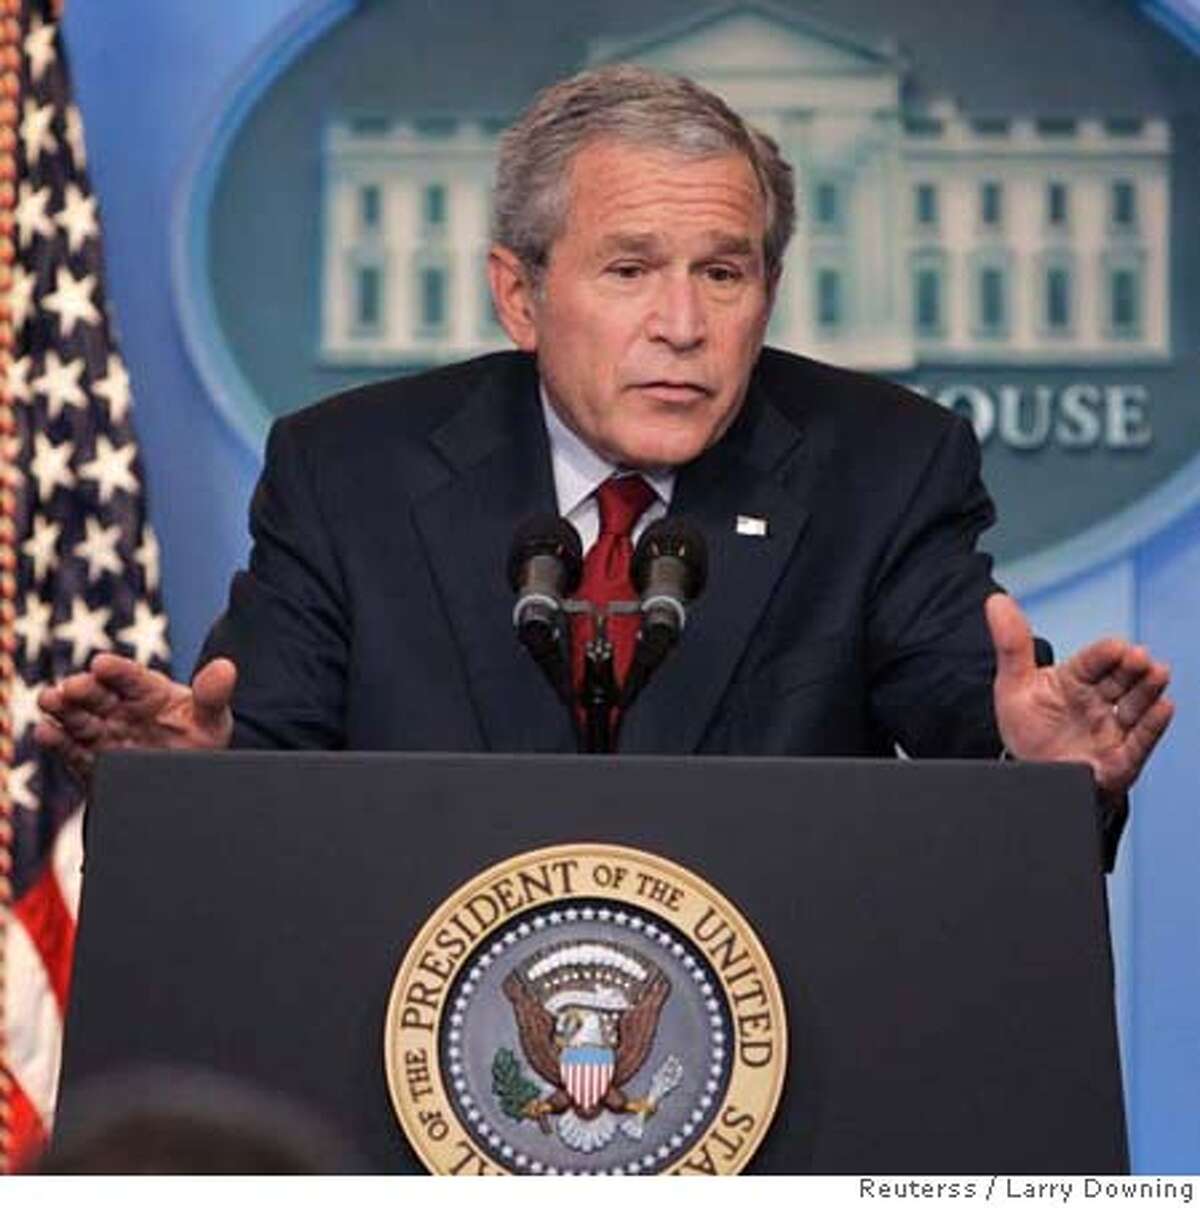 U.S. President George W. Bush holds his first official news conference in the remodeled James S. Brady Press Briefing Room at the White House in Washington, July 12, 2007. REUTERS/Larry Downing (UNITED STATES) 0